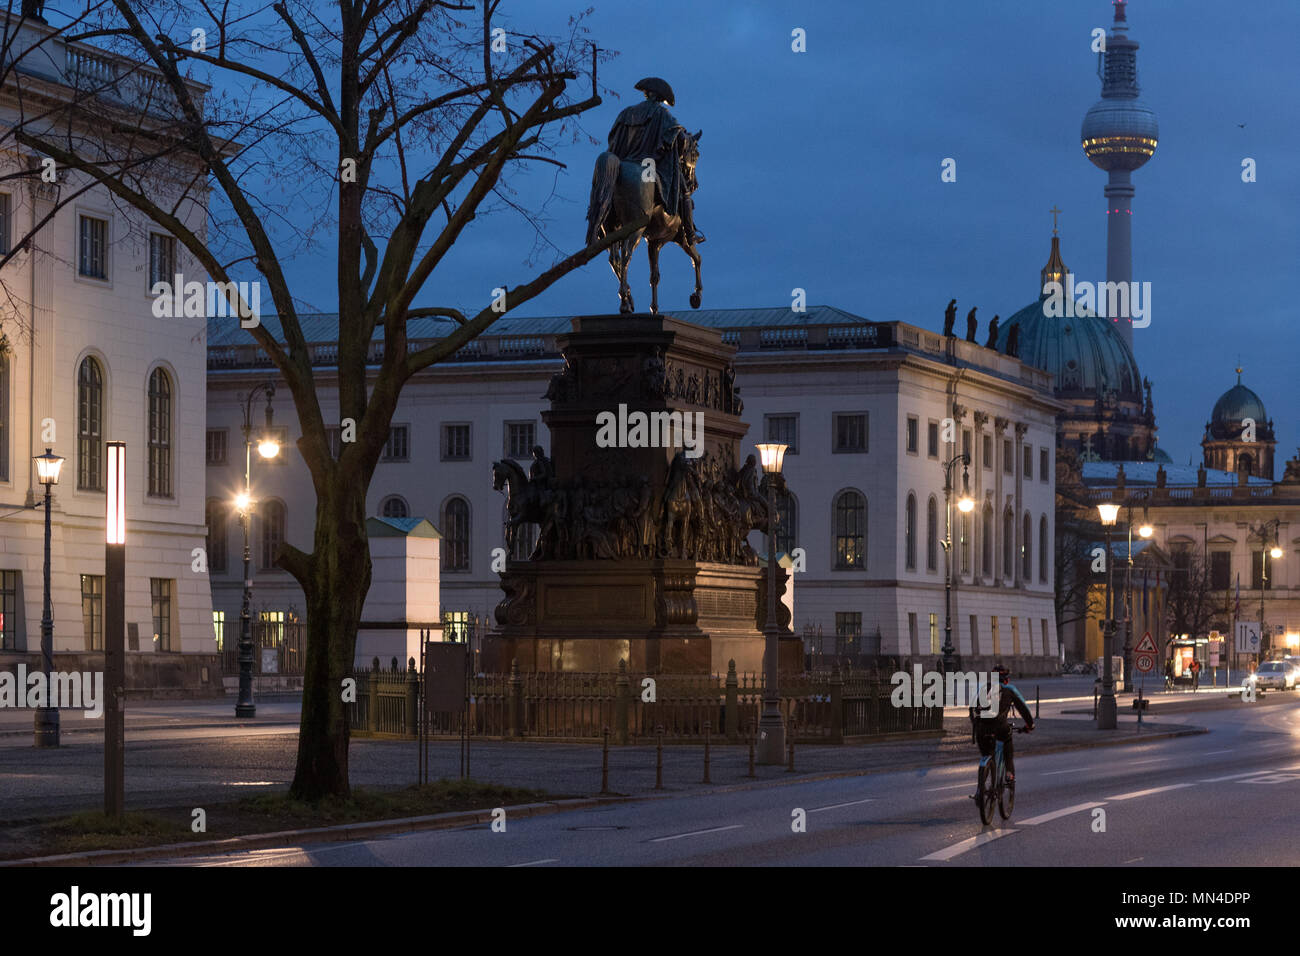 The statue of Frederick the Great, Berliner Dom, Fernsehturm & Unter den Linden at night, Mitte, Berlin, Germany Stock Photo